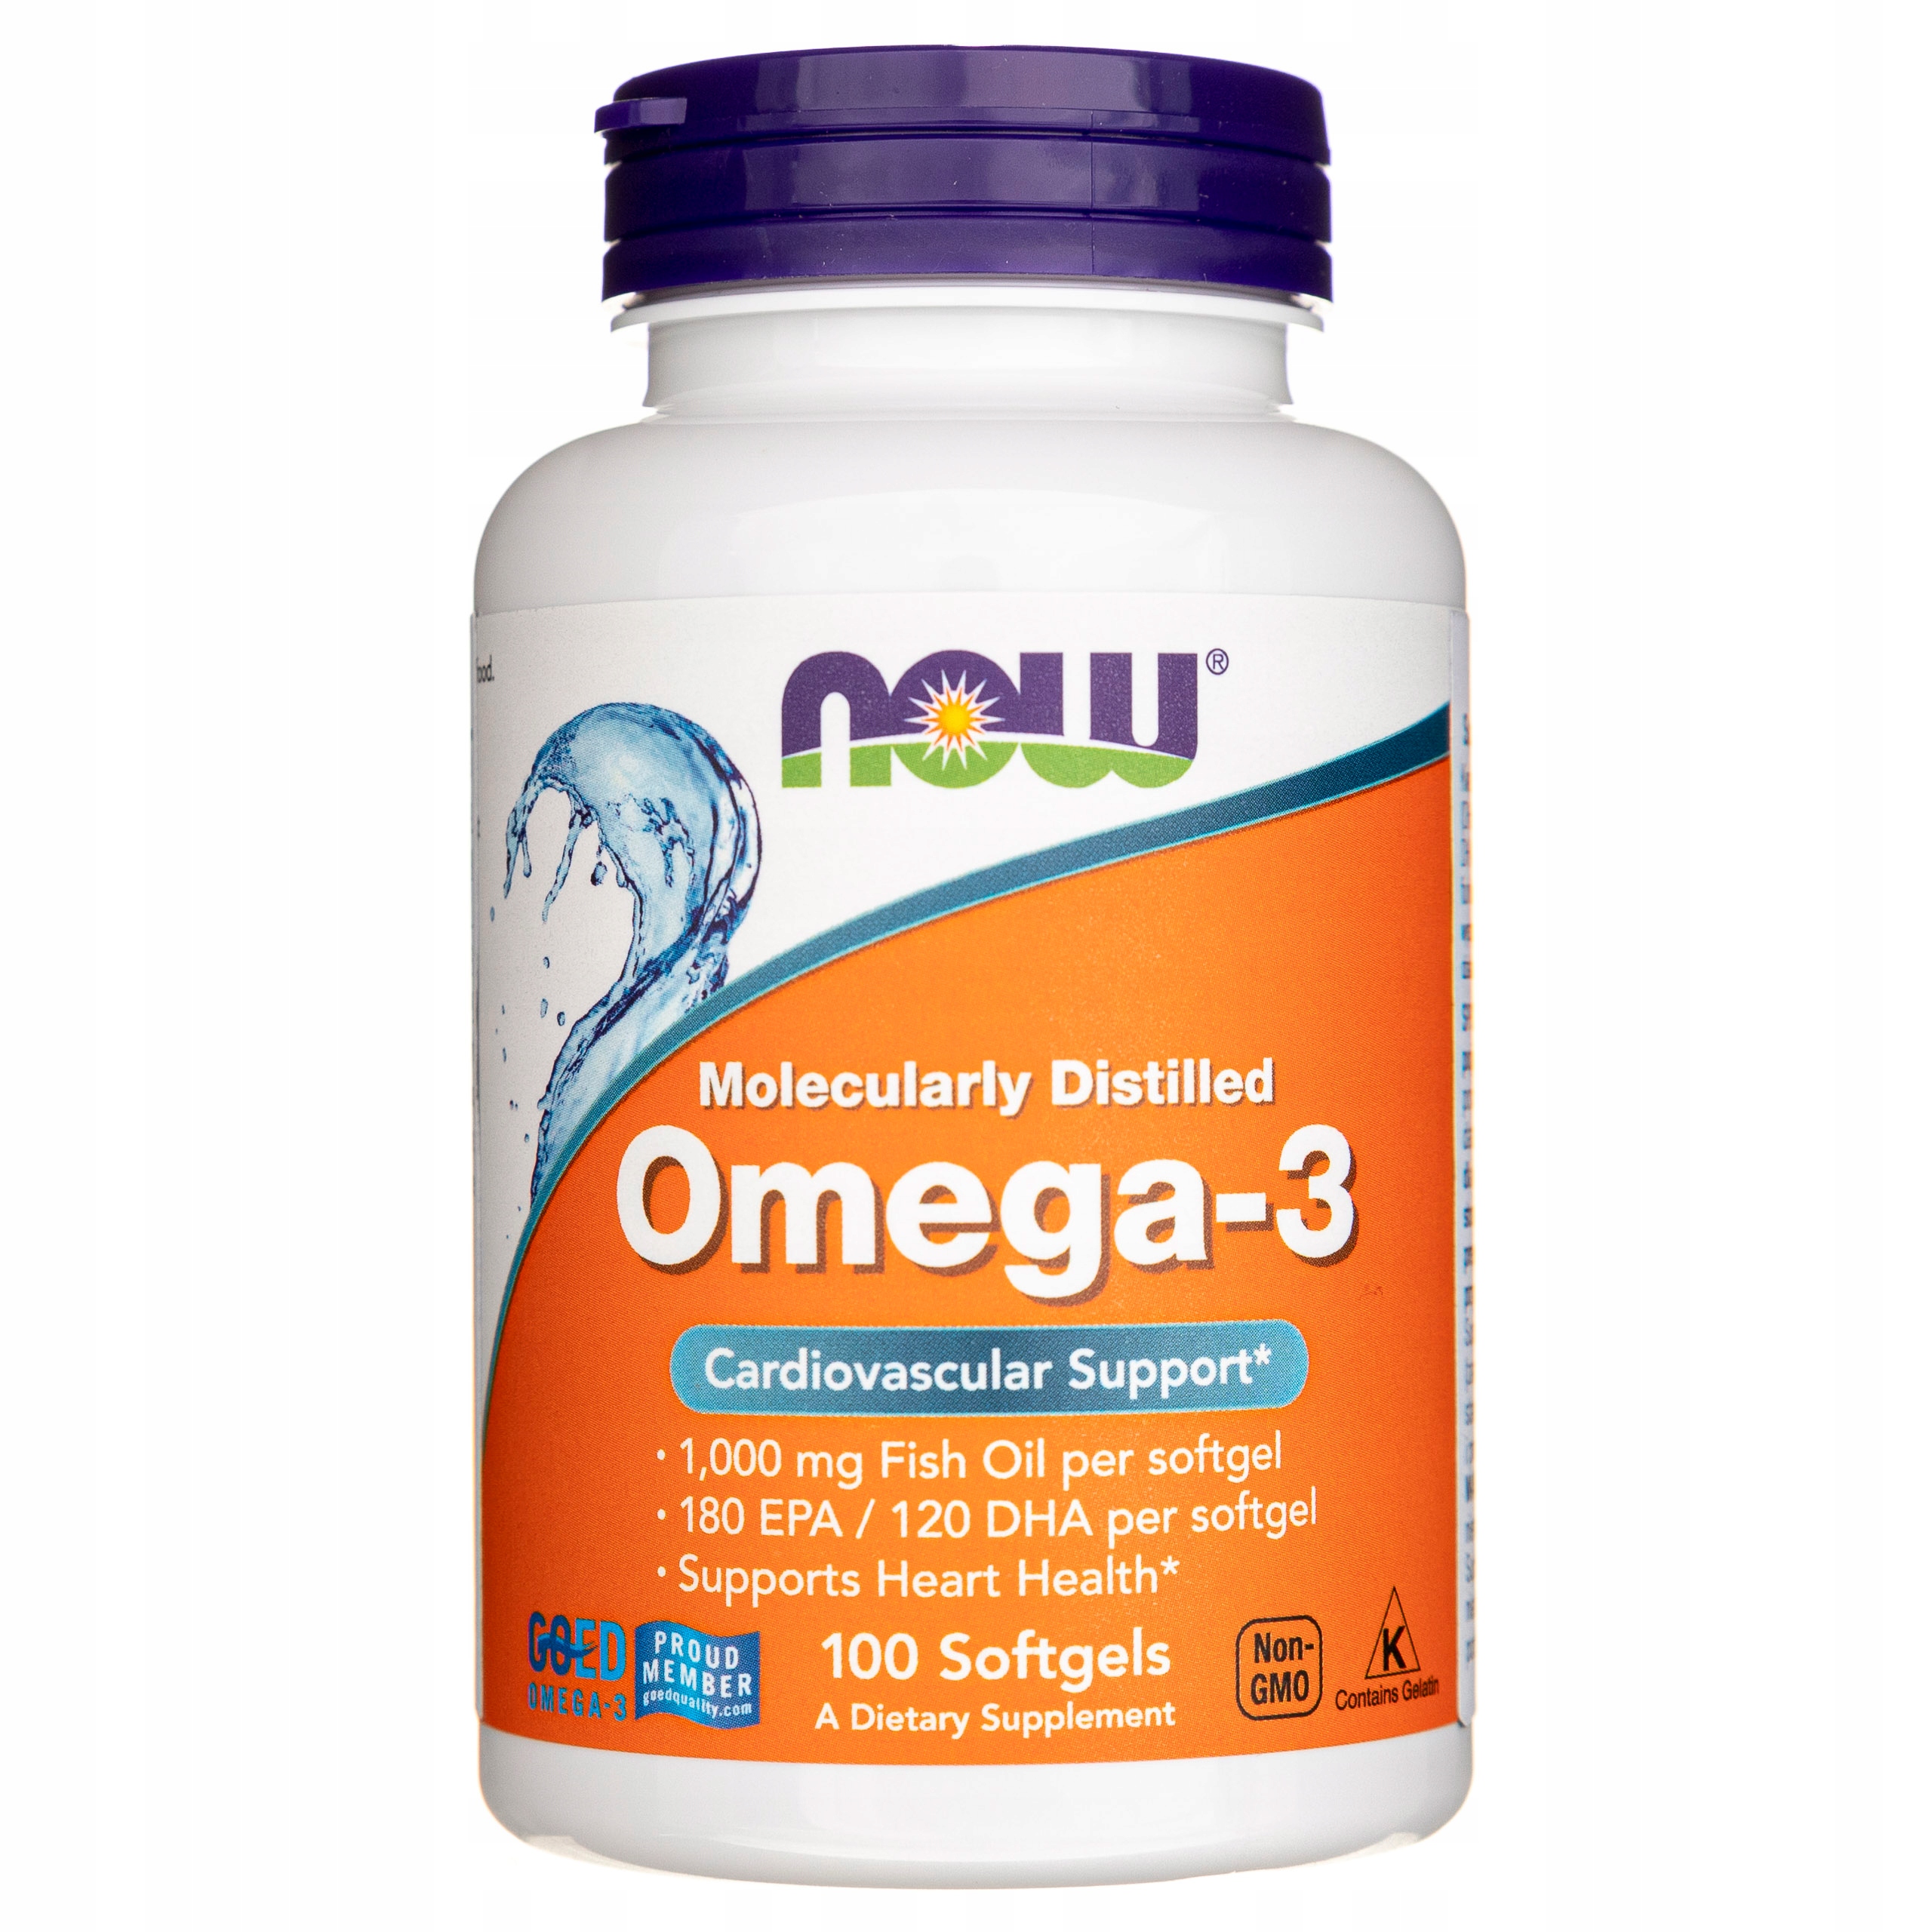 Now omega 3 dha. Now foods Ultra Omega 3 180 капсул. Now foods, ультра Омега-3, 500 ЭПК/250 ДГК. Омега 3 Now Ultra Omega. Now super Omega EPA 1200 мг.